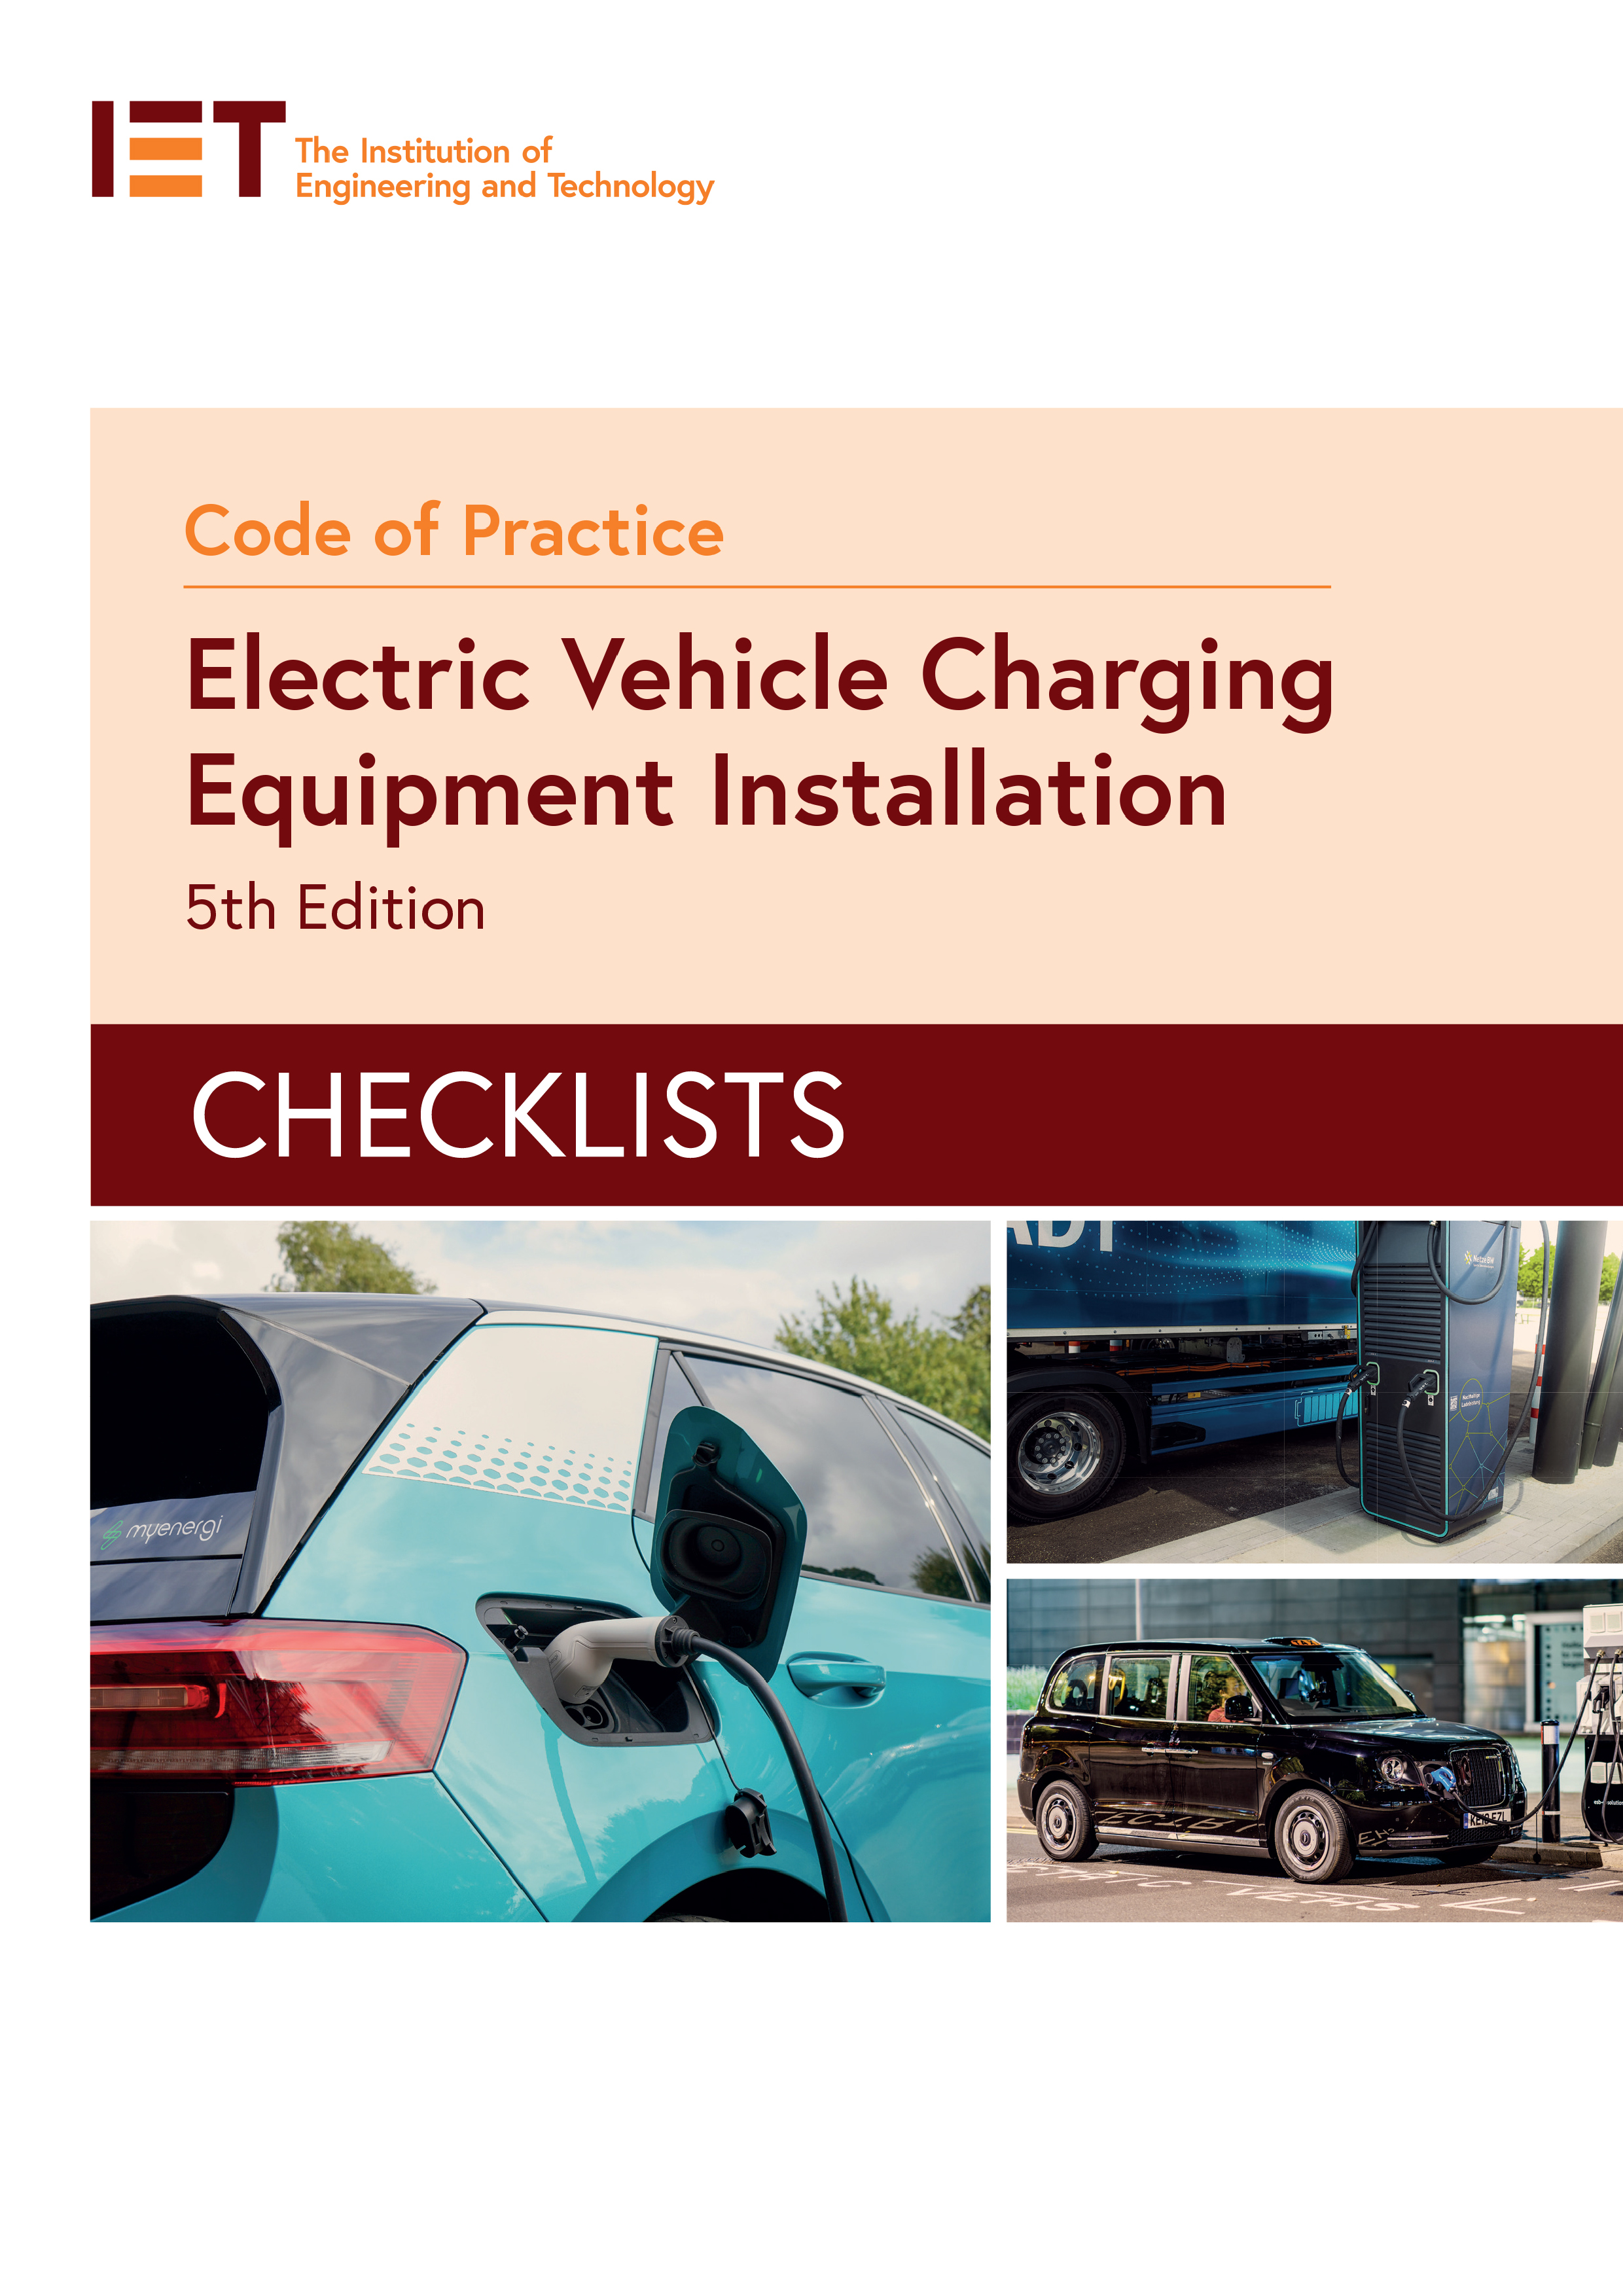 Checklists and Risk Assessments for the Code of Practice for Electric Vehicle Charging Equipment Installation, 5th Edition